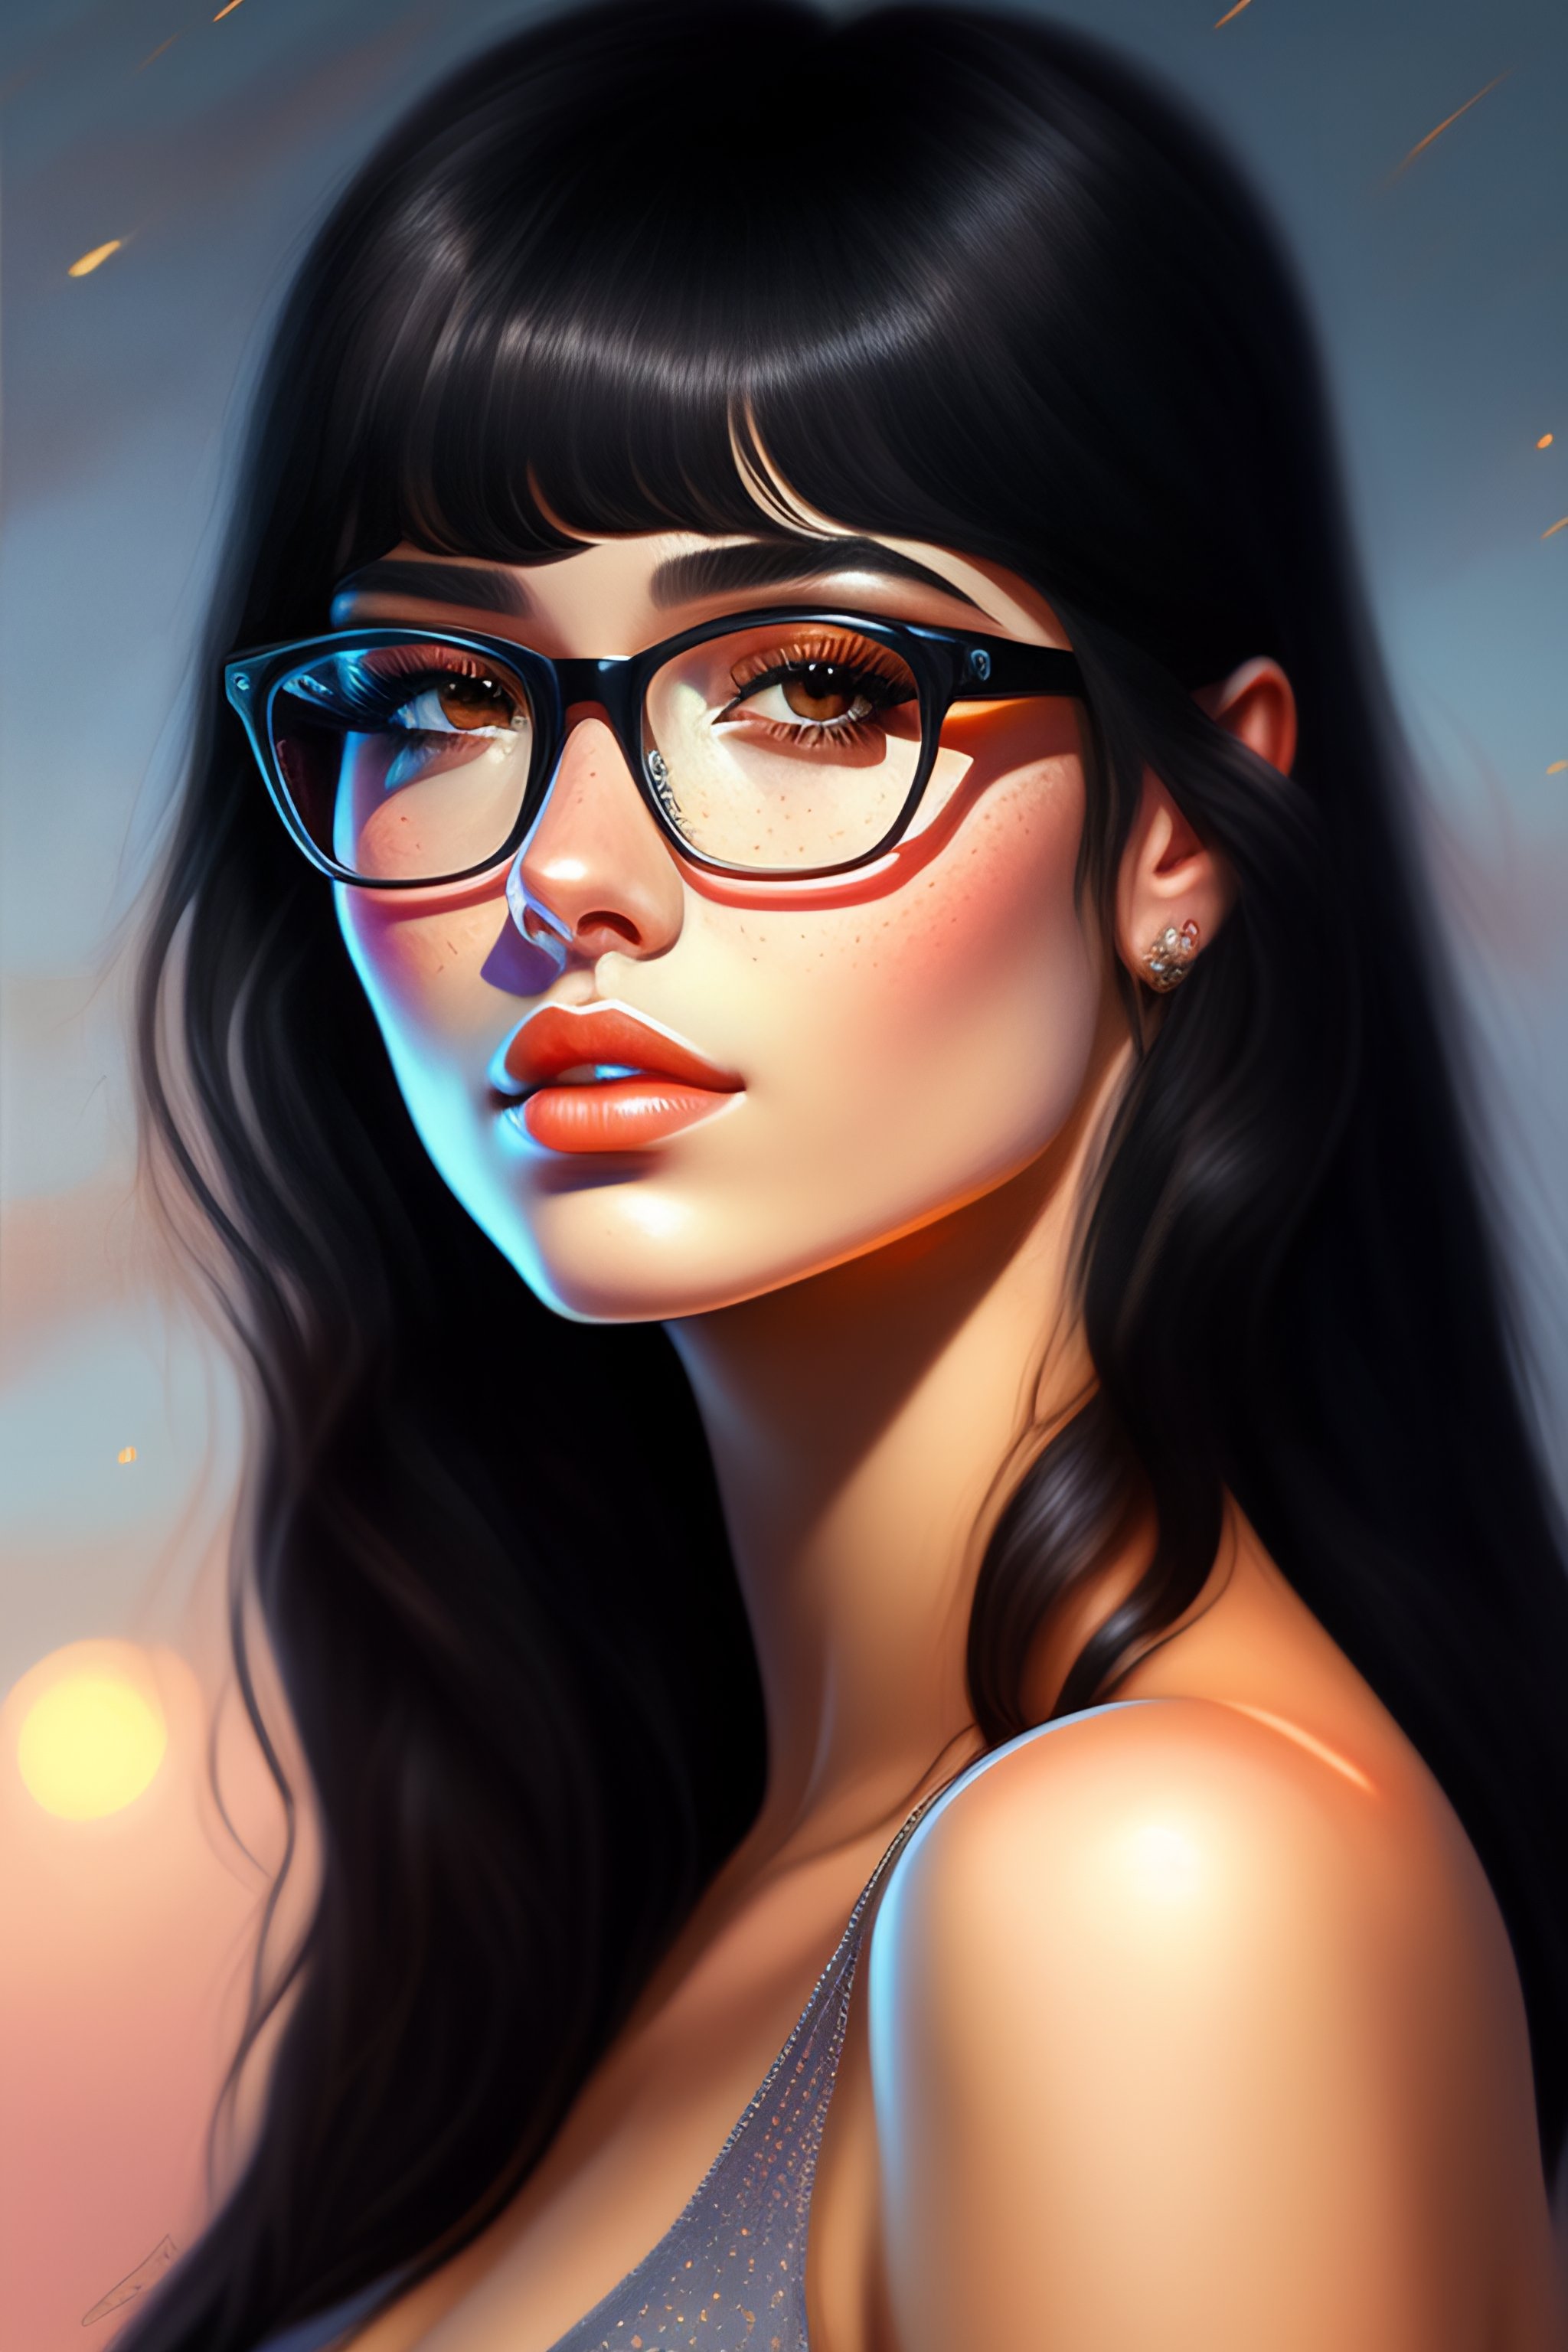 Lexica E Girl Fully Body Black Hair Bangs Hairstyle Glasses Small Freckles High Detail 8662